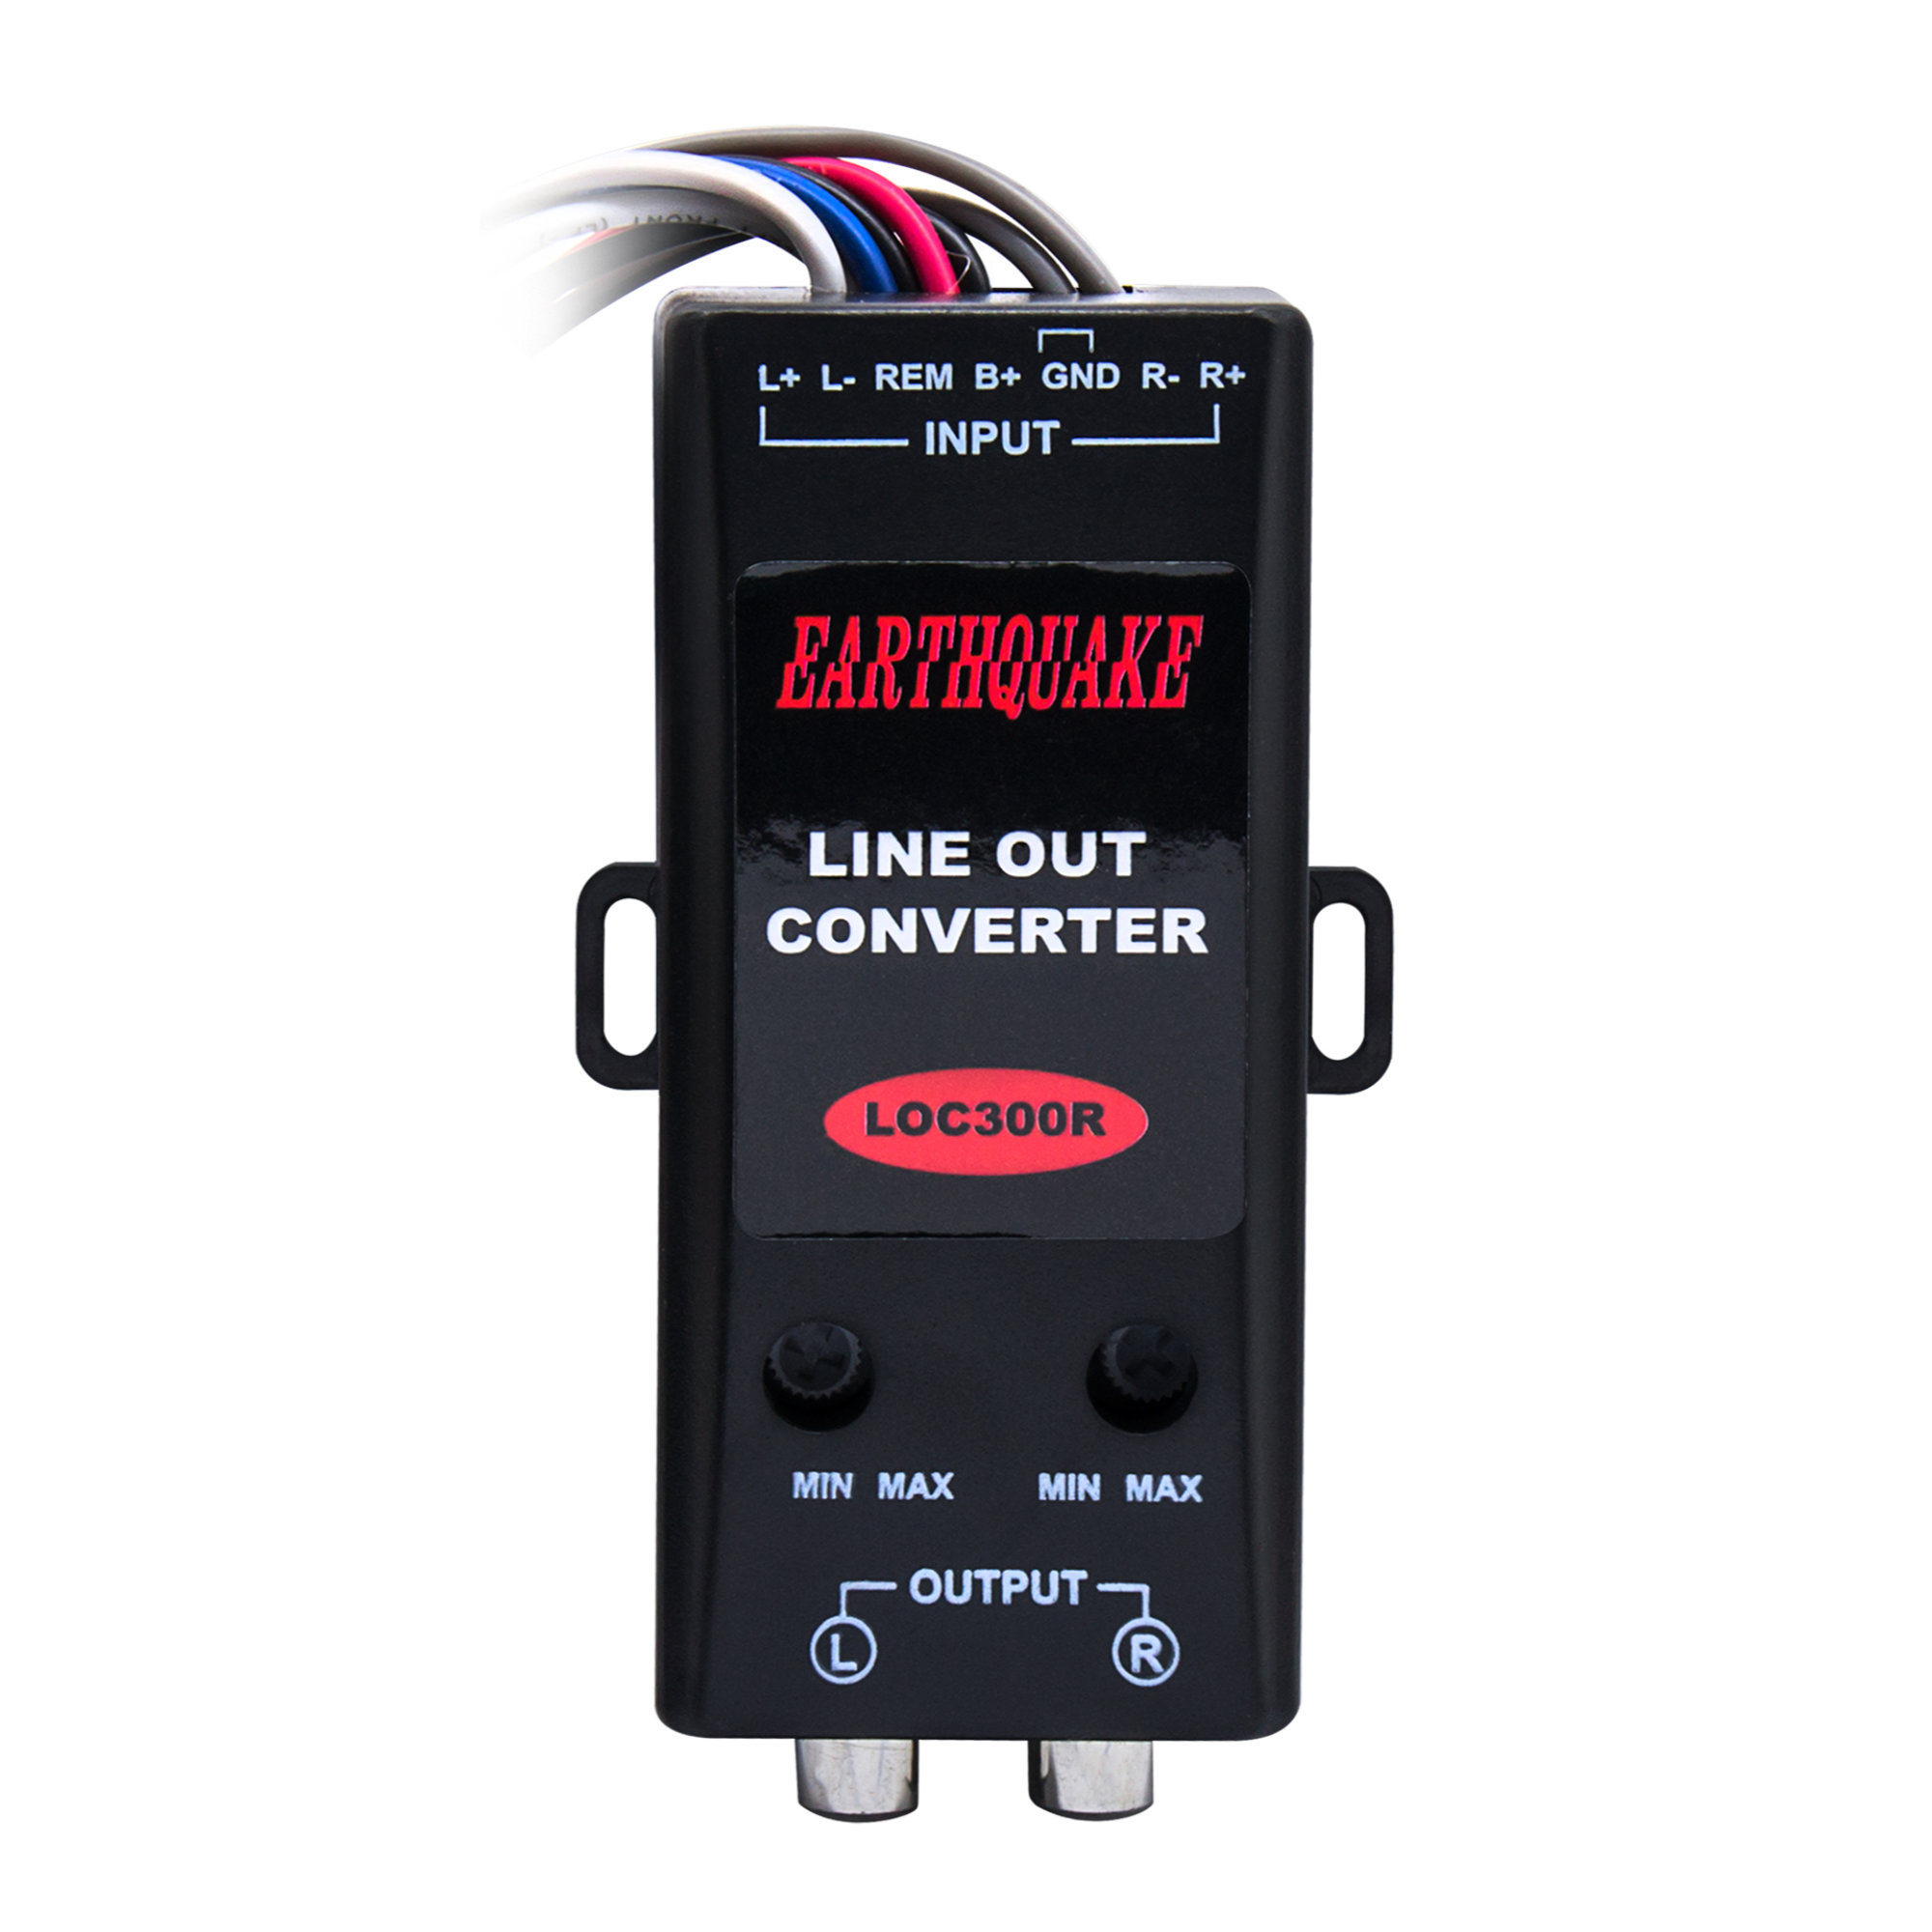 Earthquake Sound LOC300R line out converter front view